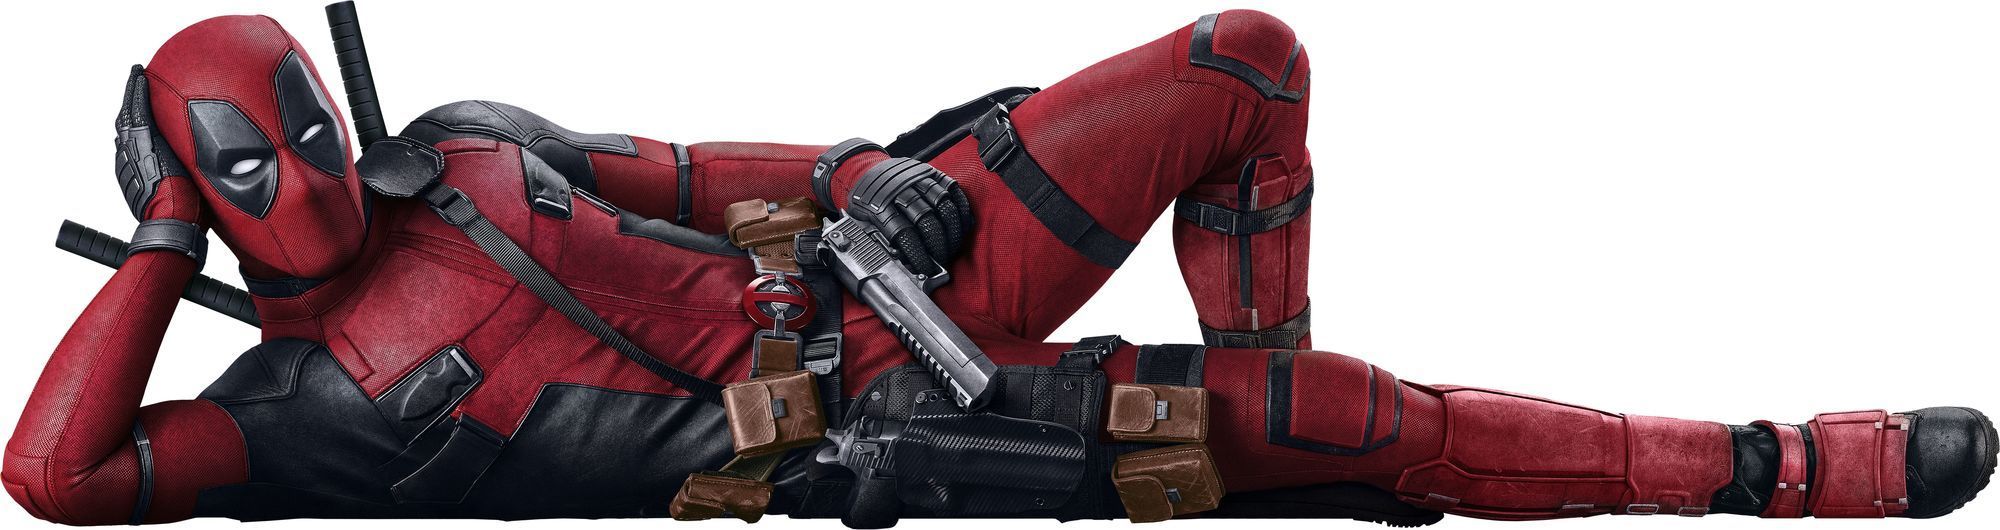 A new Deadpool skin in Fornite is possible